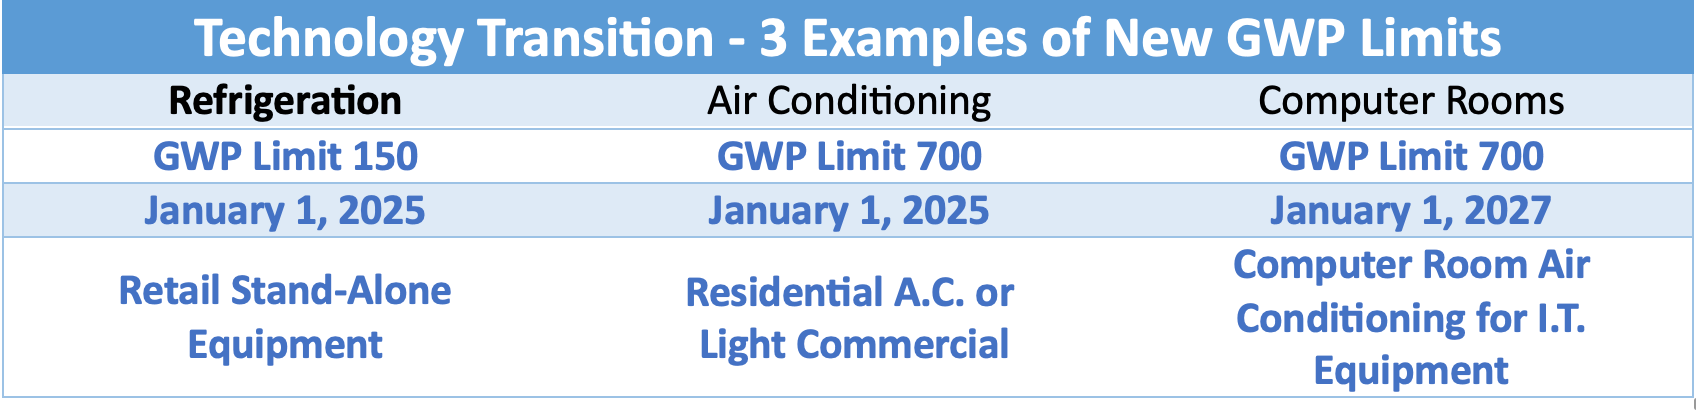 Technology Transition - 3 Examples of New GWP Limits